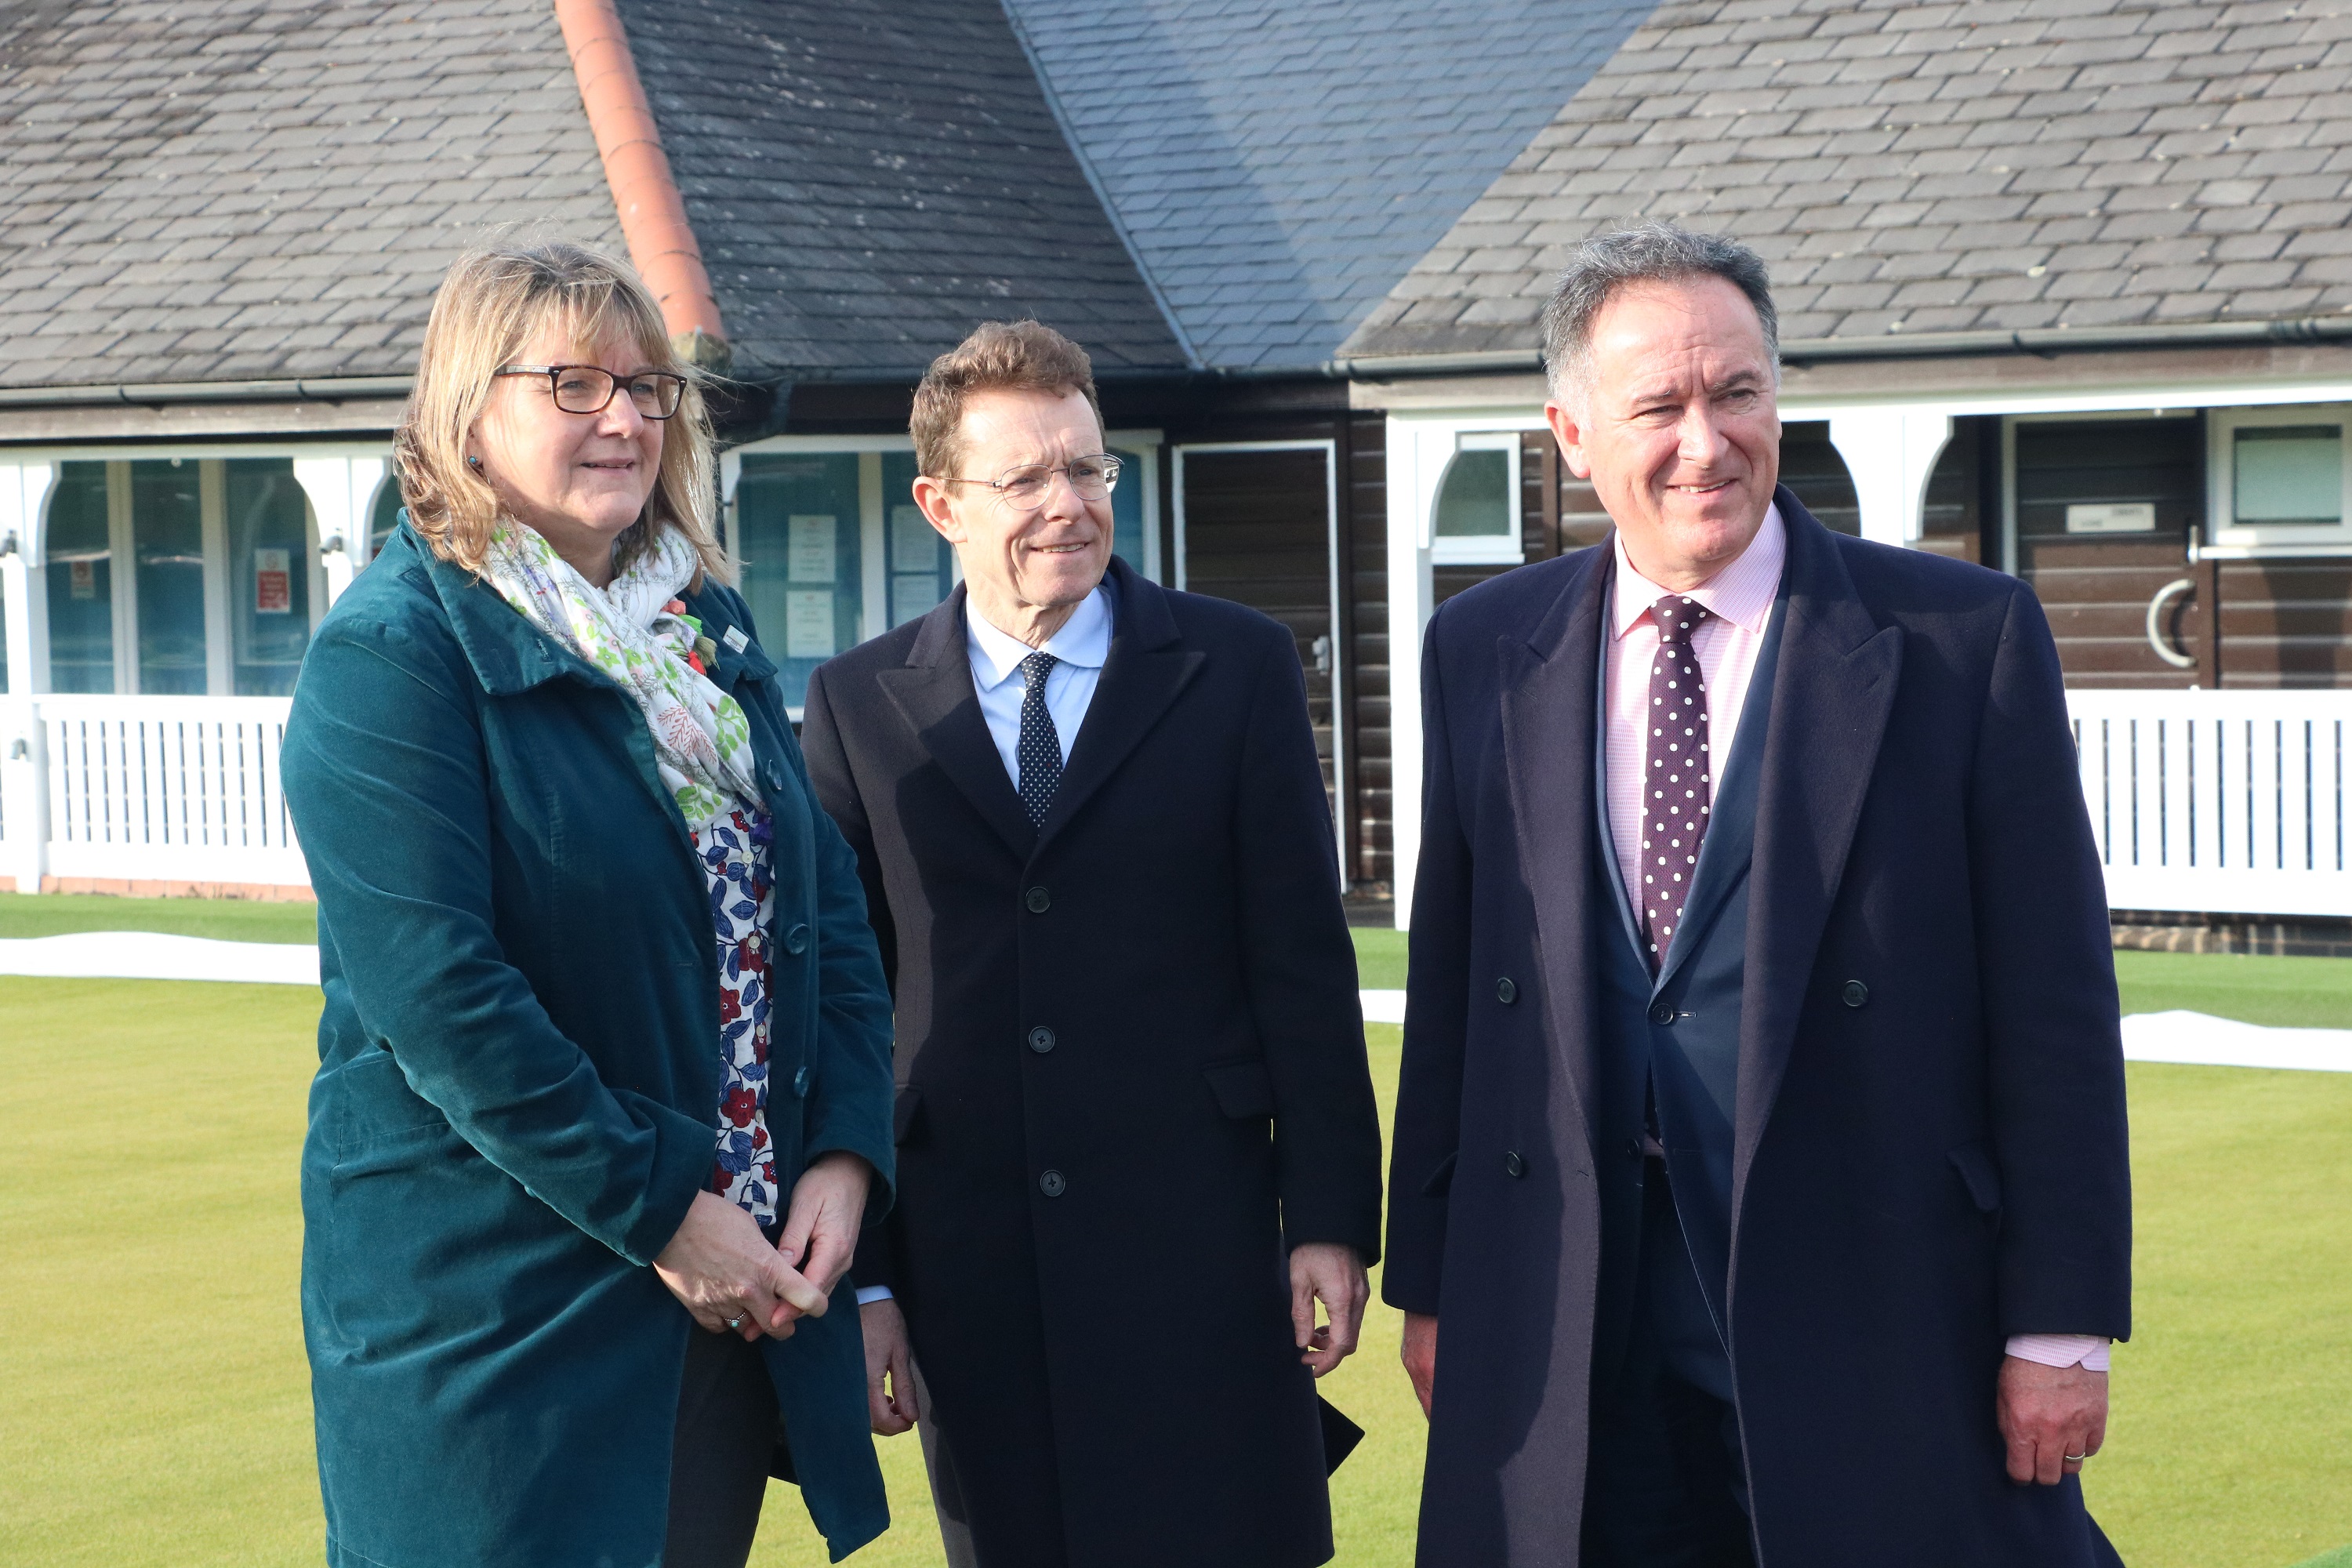 Pictured at Victoria Park are (L-R) Rose Winship, Warwick District Council’s head of Culture, Tourism and Leisure; Andy Street, Mayor of the West Midlands; and Councillor Andrew Day, Leader of the council